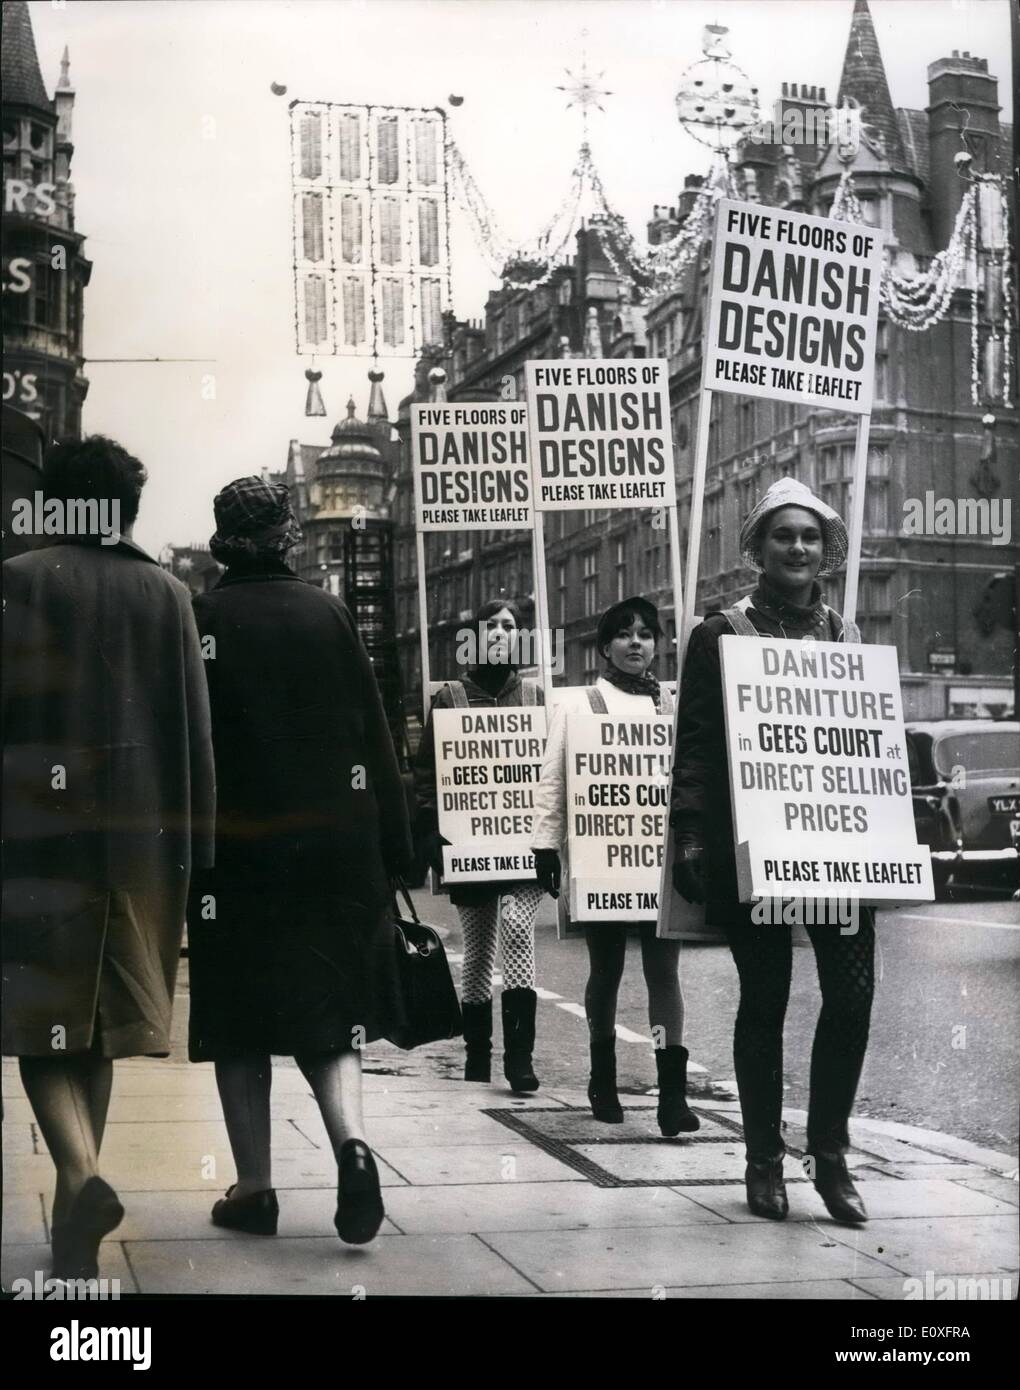 Nov. 11, 1966 - Girls apply for sandwich board job and get it: The newspaper advertisement said Sandwich Board men Wanted. Applying for the job were three girls Mairi Maclean of Glasgow, Helen Abercrombie, of Glasgow, and Guinea Hunter, of Wembley, and they started work this morning in the West End of London. Photo shows the three girls pictured with their Sandwich Boards after starting work, in Oxford Street today. They are: From front to rear: Guinea Hunter, of Wembley; Helen Abercrombie, of Glasgow, and Mairi Maclean, also of Glasgow. Stock Photo